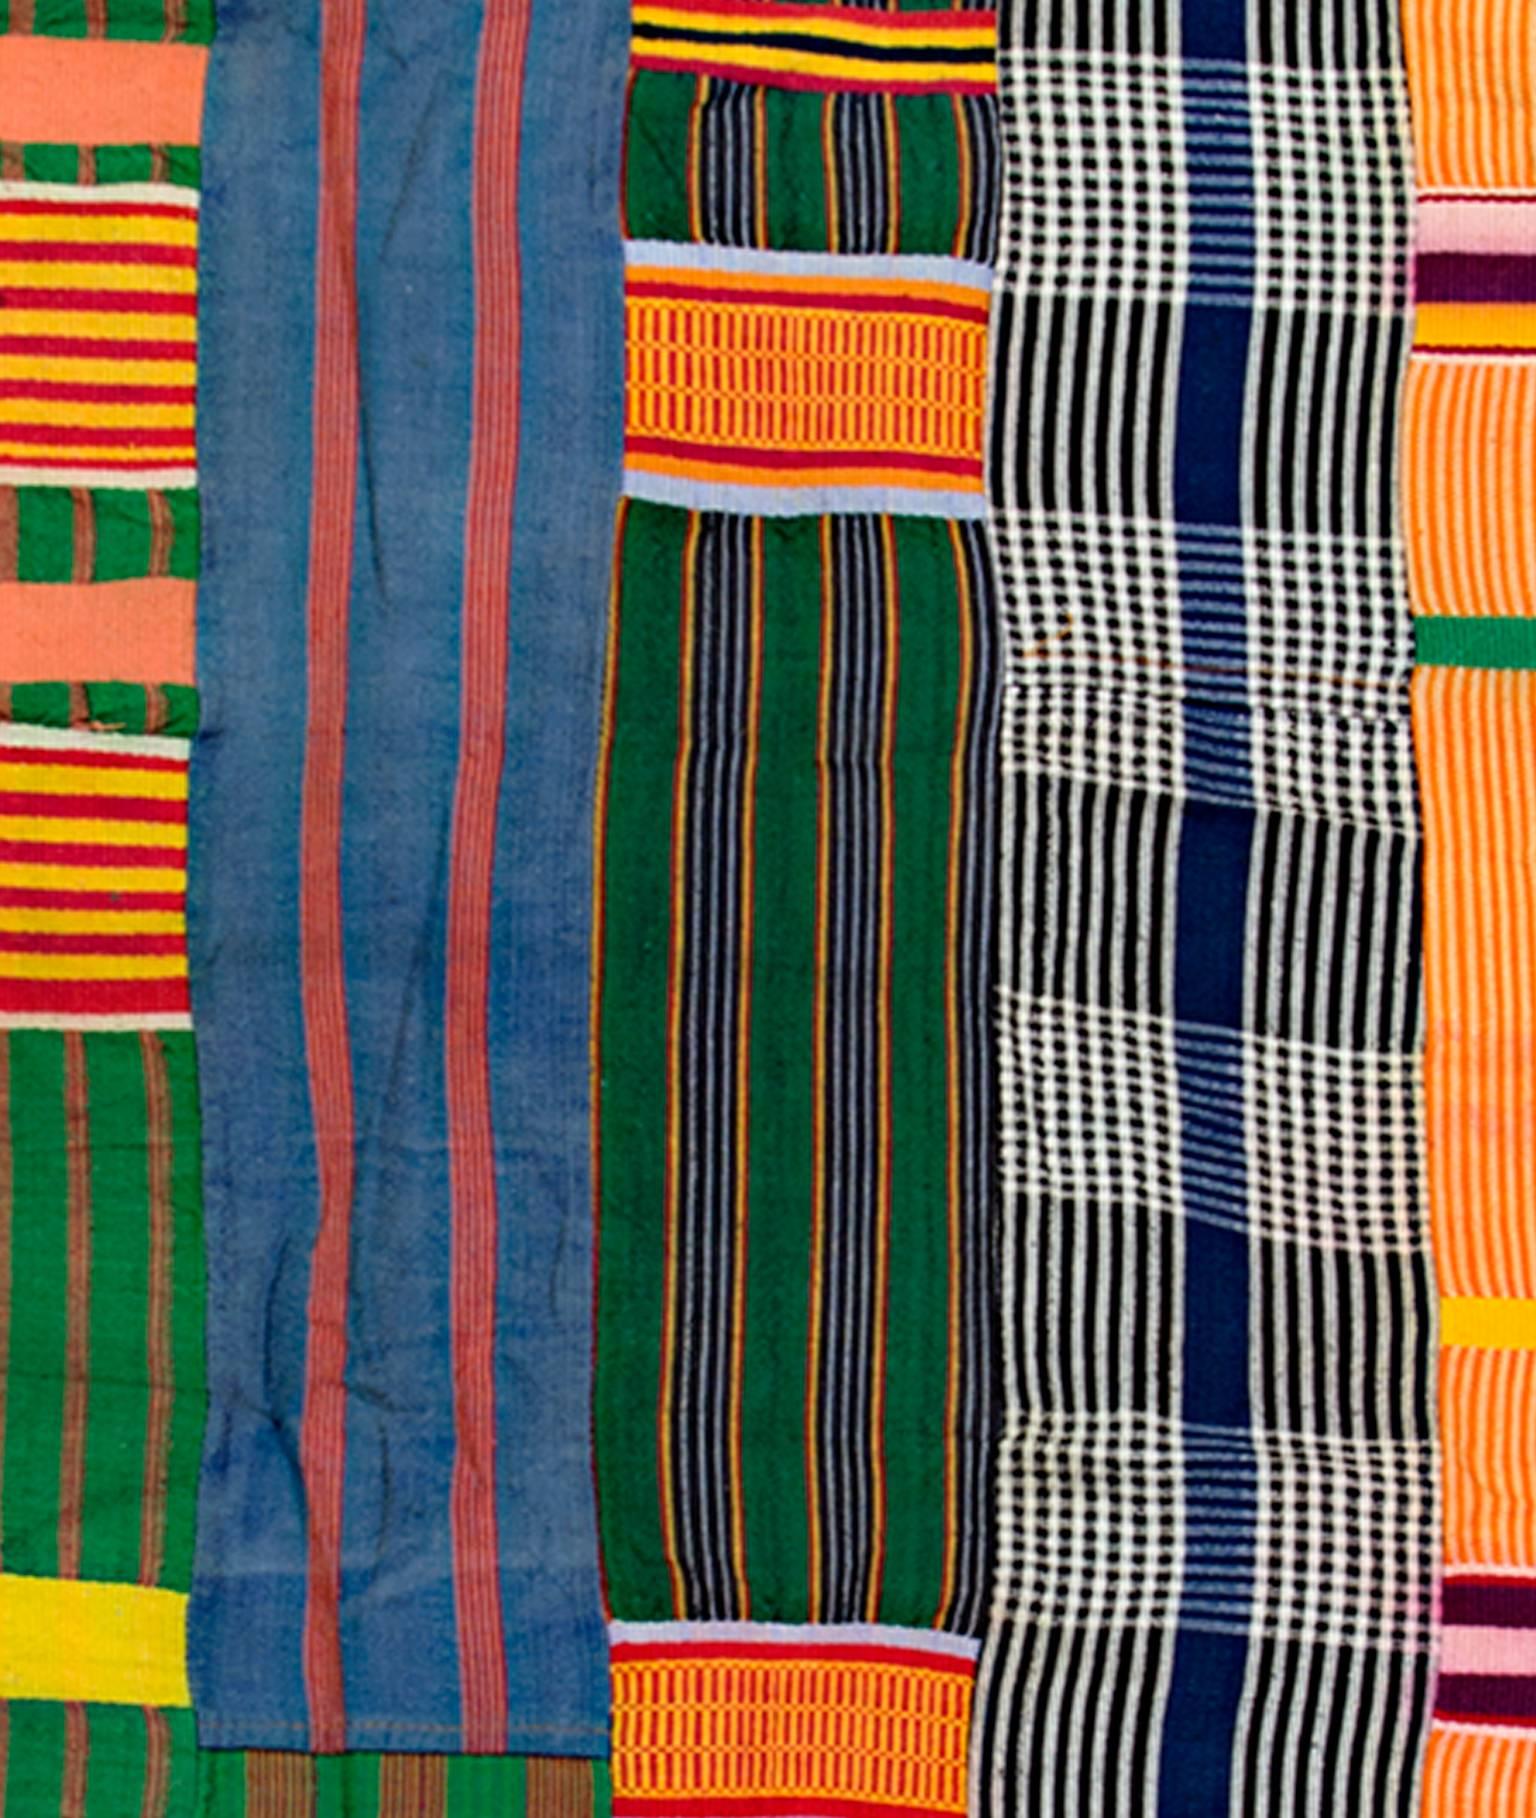 The Ewe people from Ghana are master weavers. People of means commission cloths called adanudo (